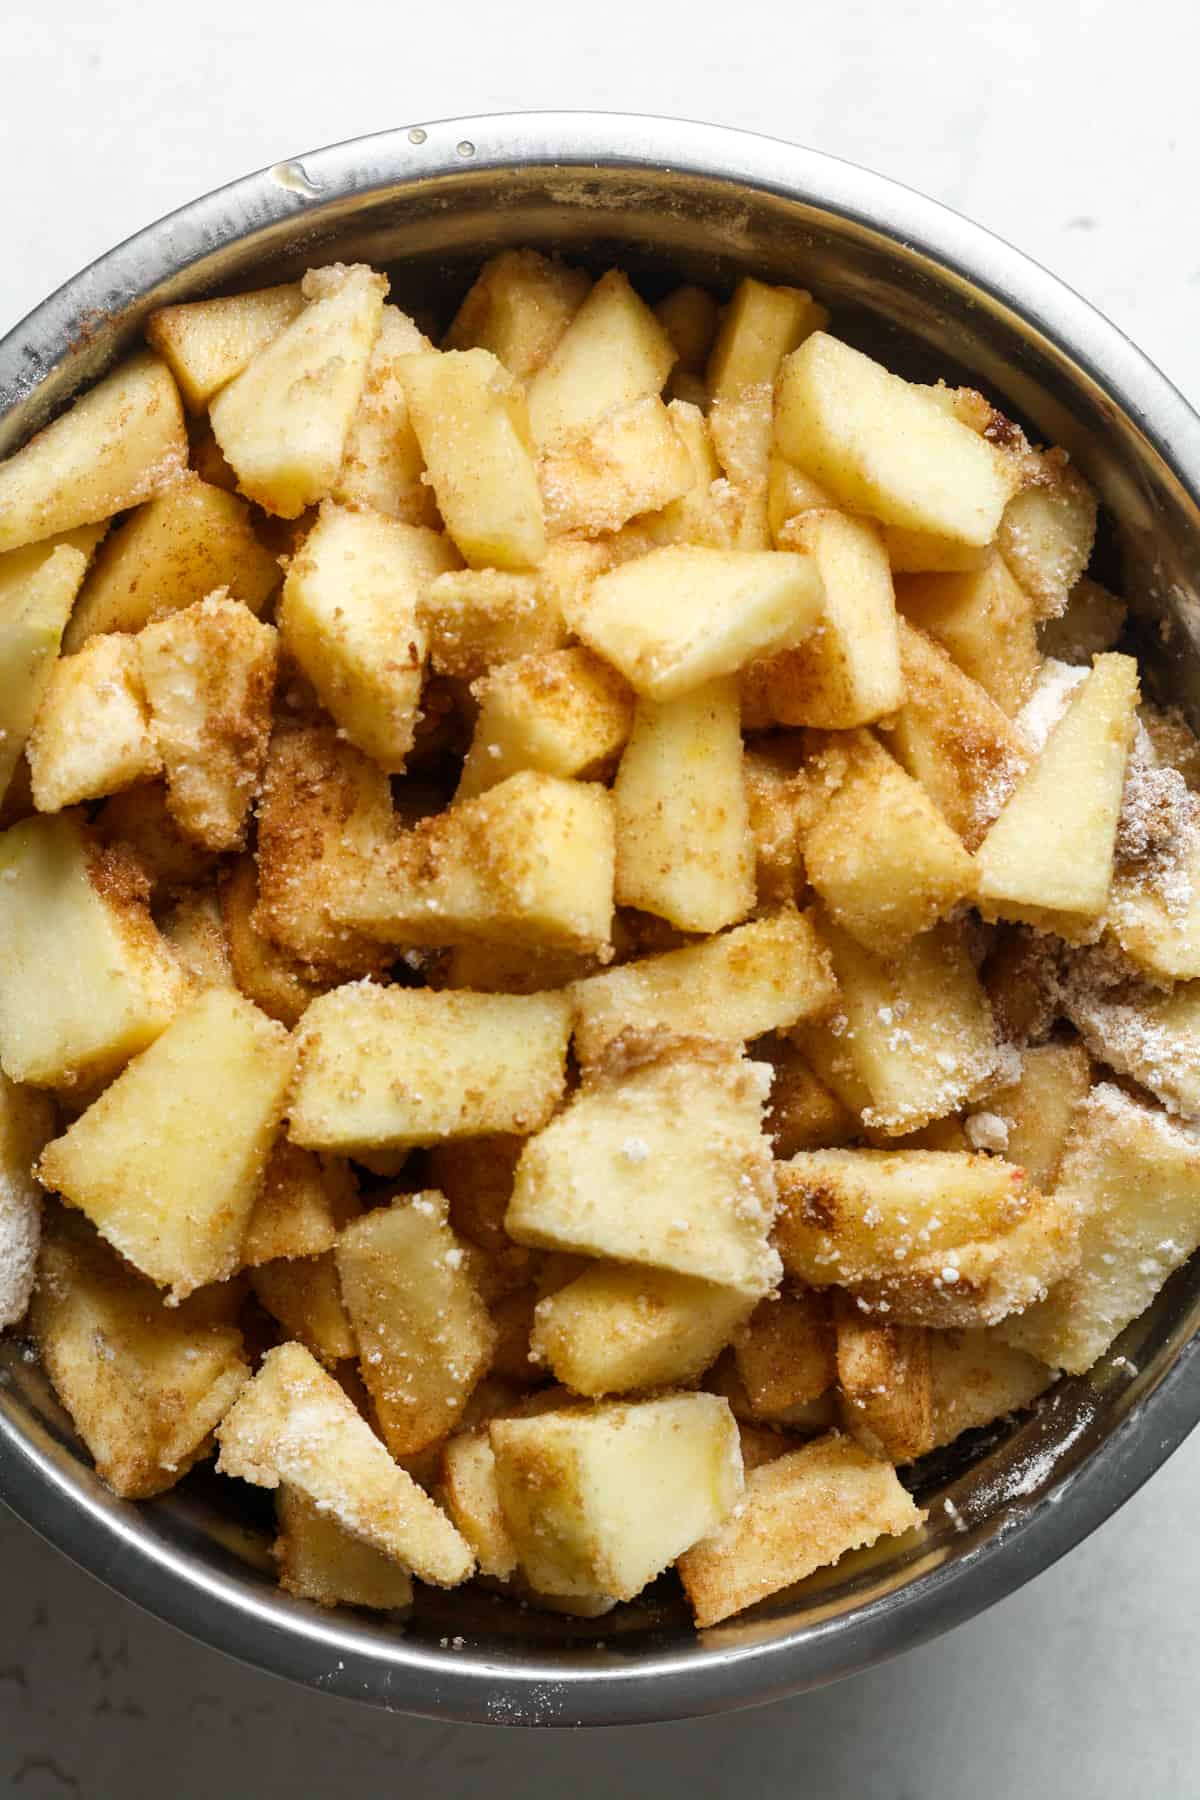 Apples covered in cinnamon.